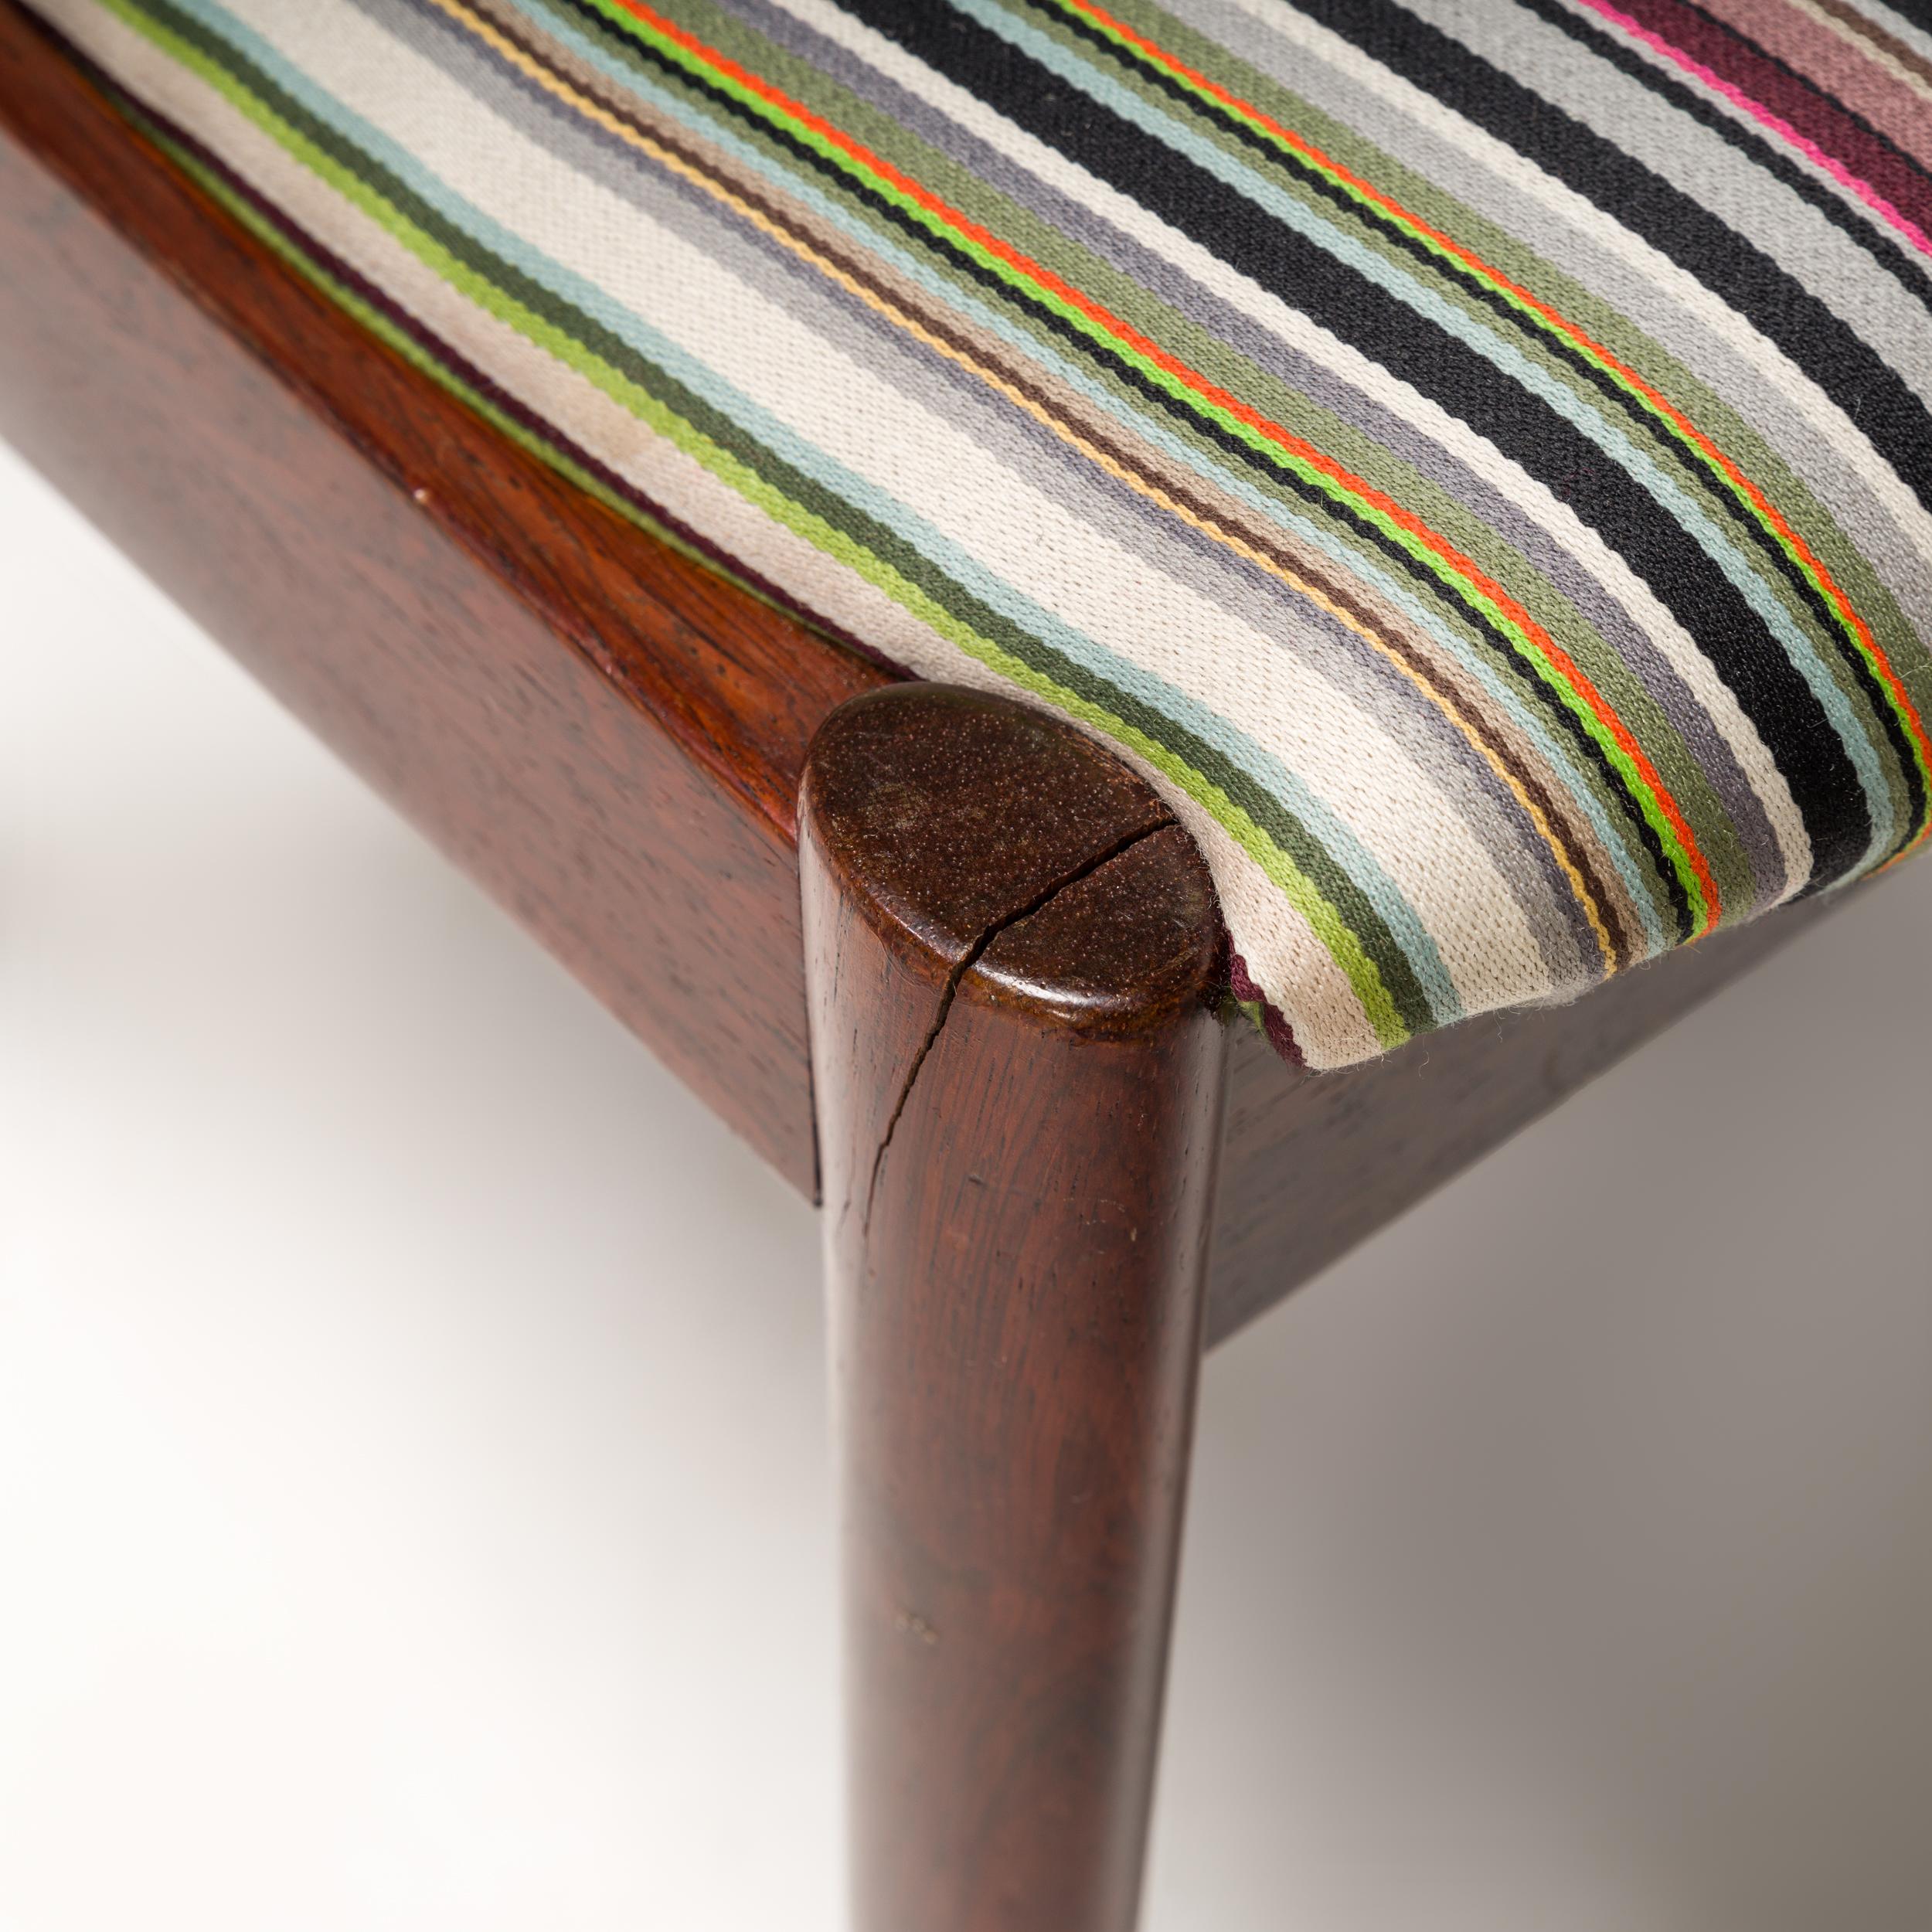 Kai Kristiansen Rosewood No 42 Dining Chairs with Paul Smith Fabric, Set of 2 For Sale 10